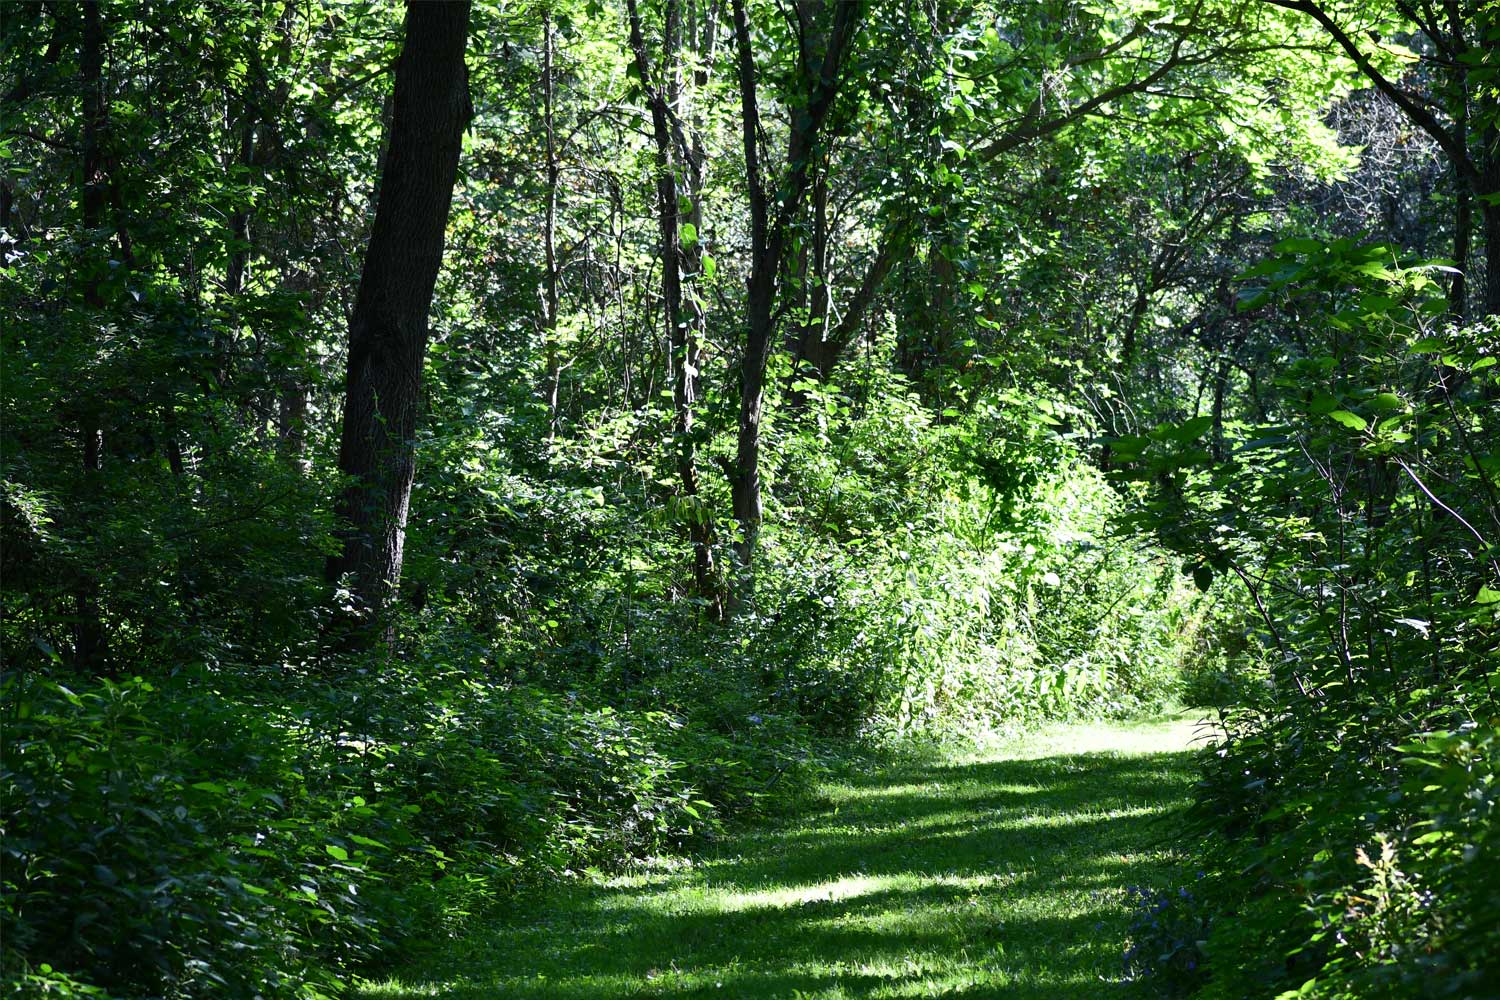 Grass trail lined by trees.